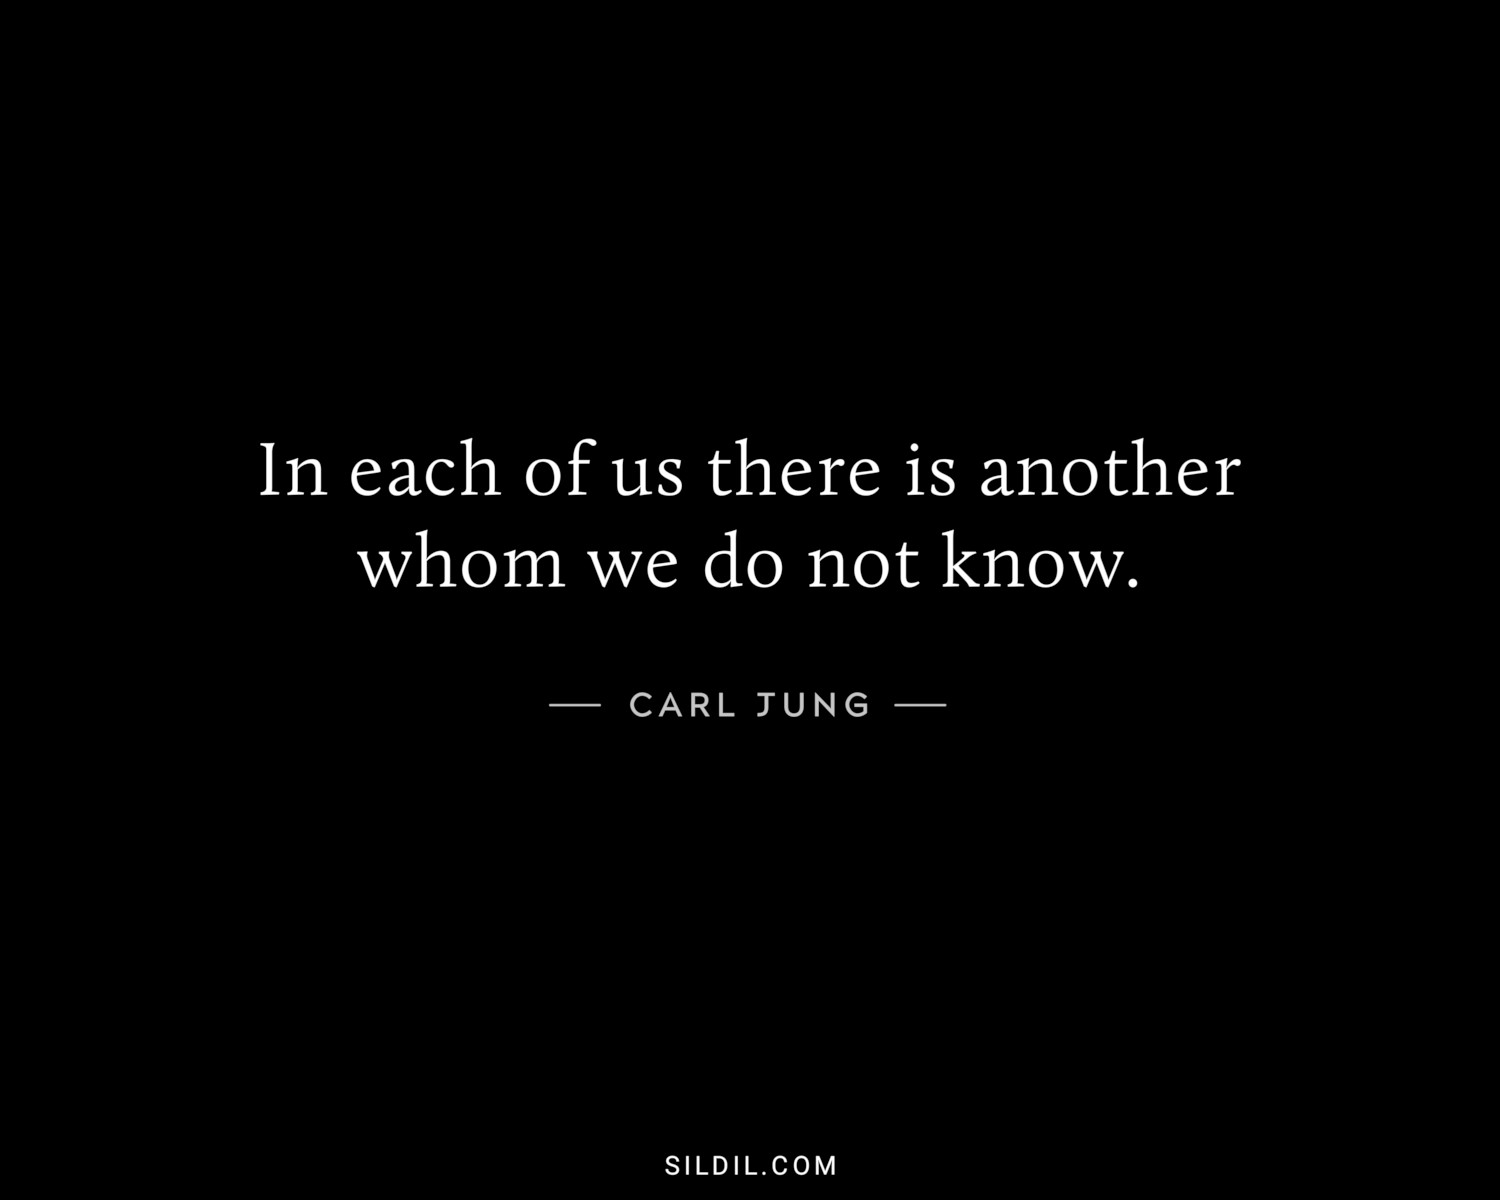 In each of us there is another whom we do not know.